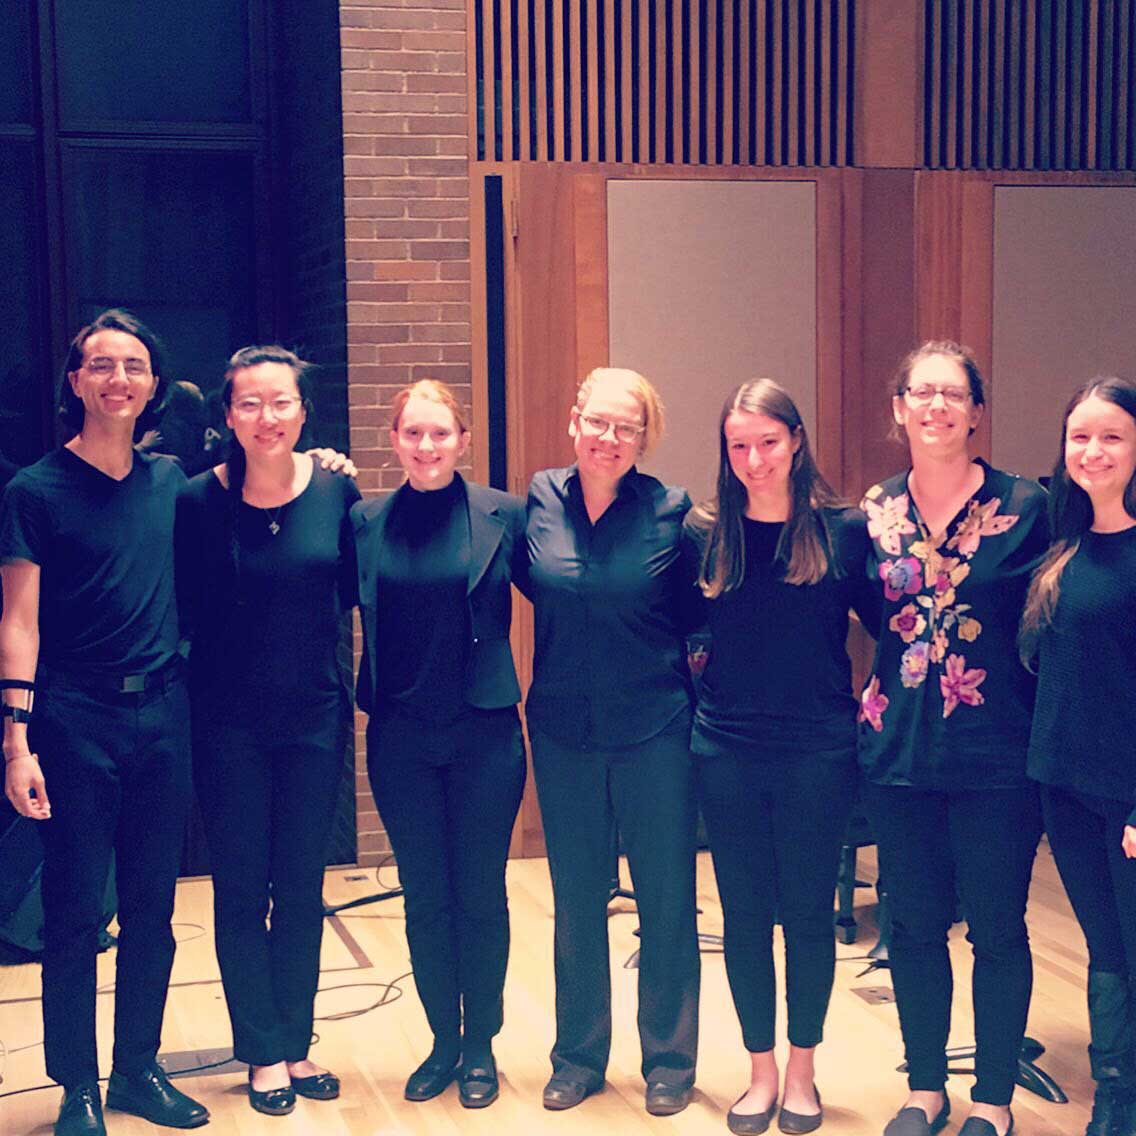 Divergent Studio performers pose on stage together